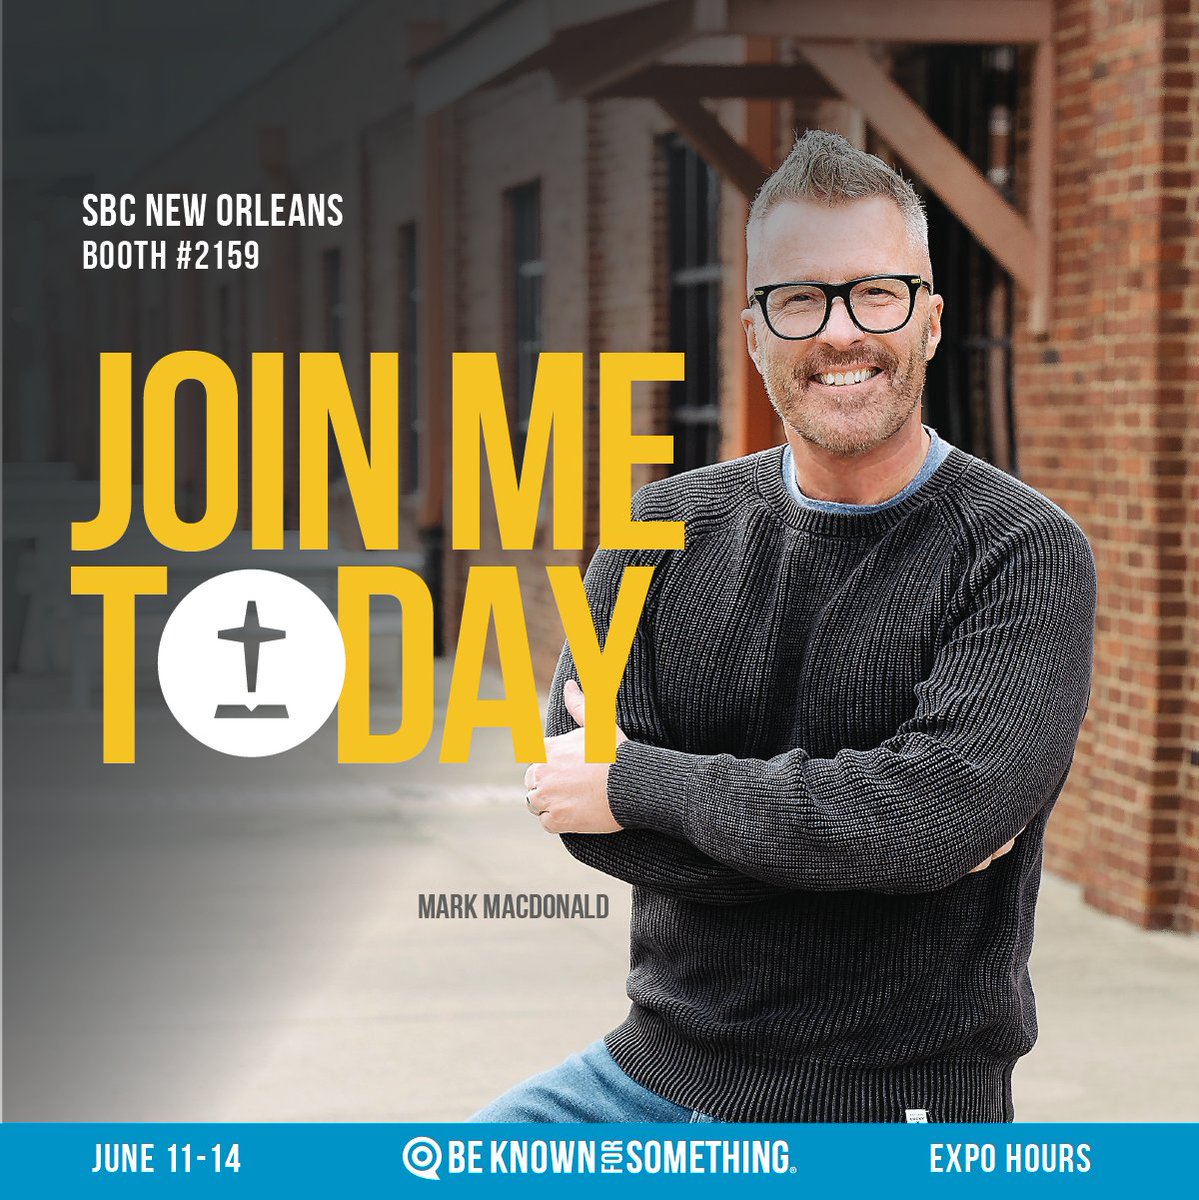 LAST DAY! SBC Annual Mtg, Booth #2159. Author of the bestselling Church Branding book. Ask me anything! #Branding, #websites, #socialmedia, #emails, #SEO.
Final Opportunity. Expo Hours. 
#beknownforsomething #discoveryourthread #churchcomms #communication #annualmeeting #sbc23